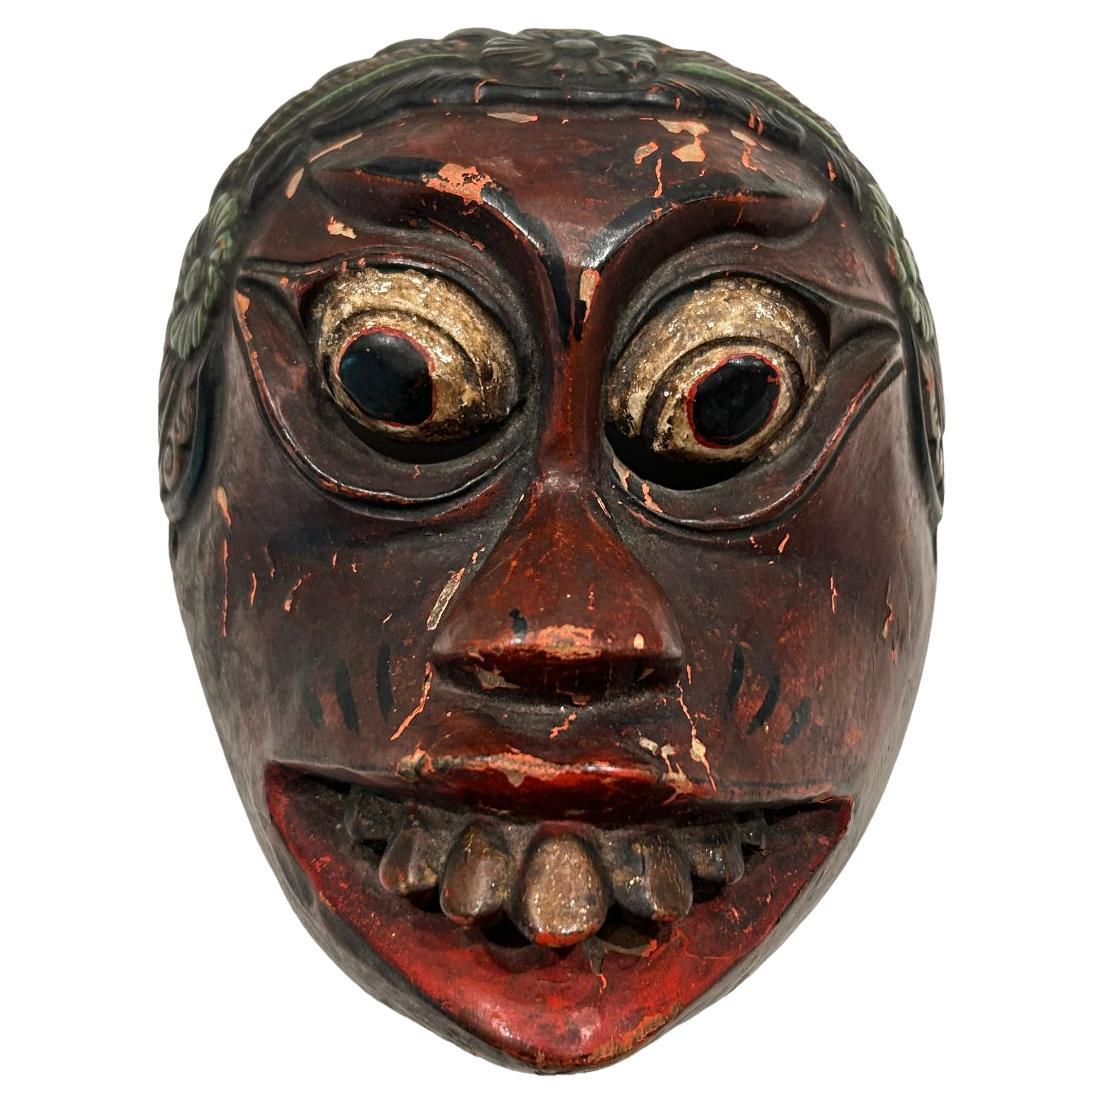 What are Javanese masks?